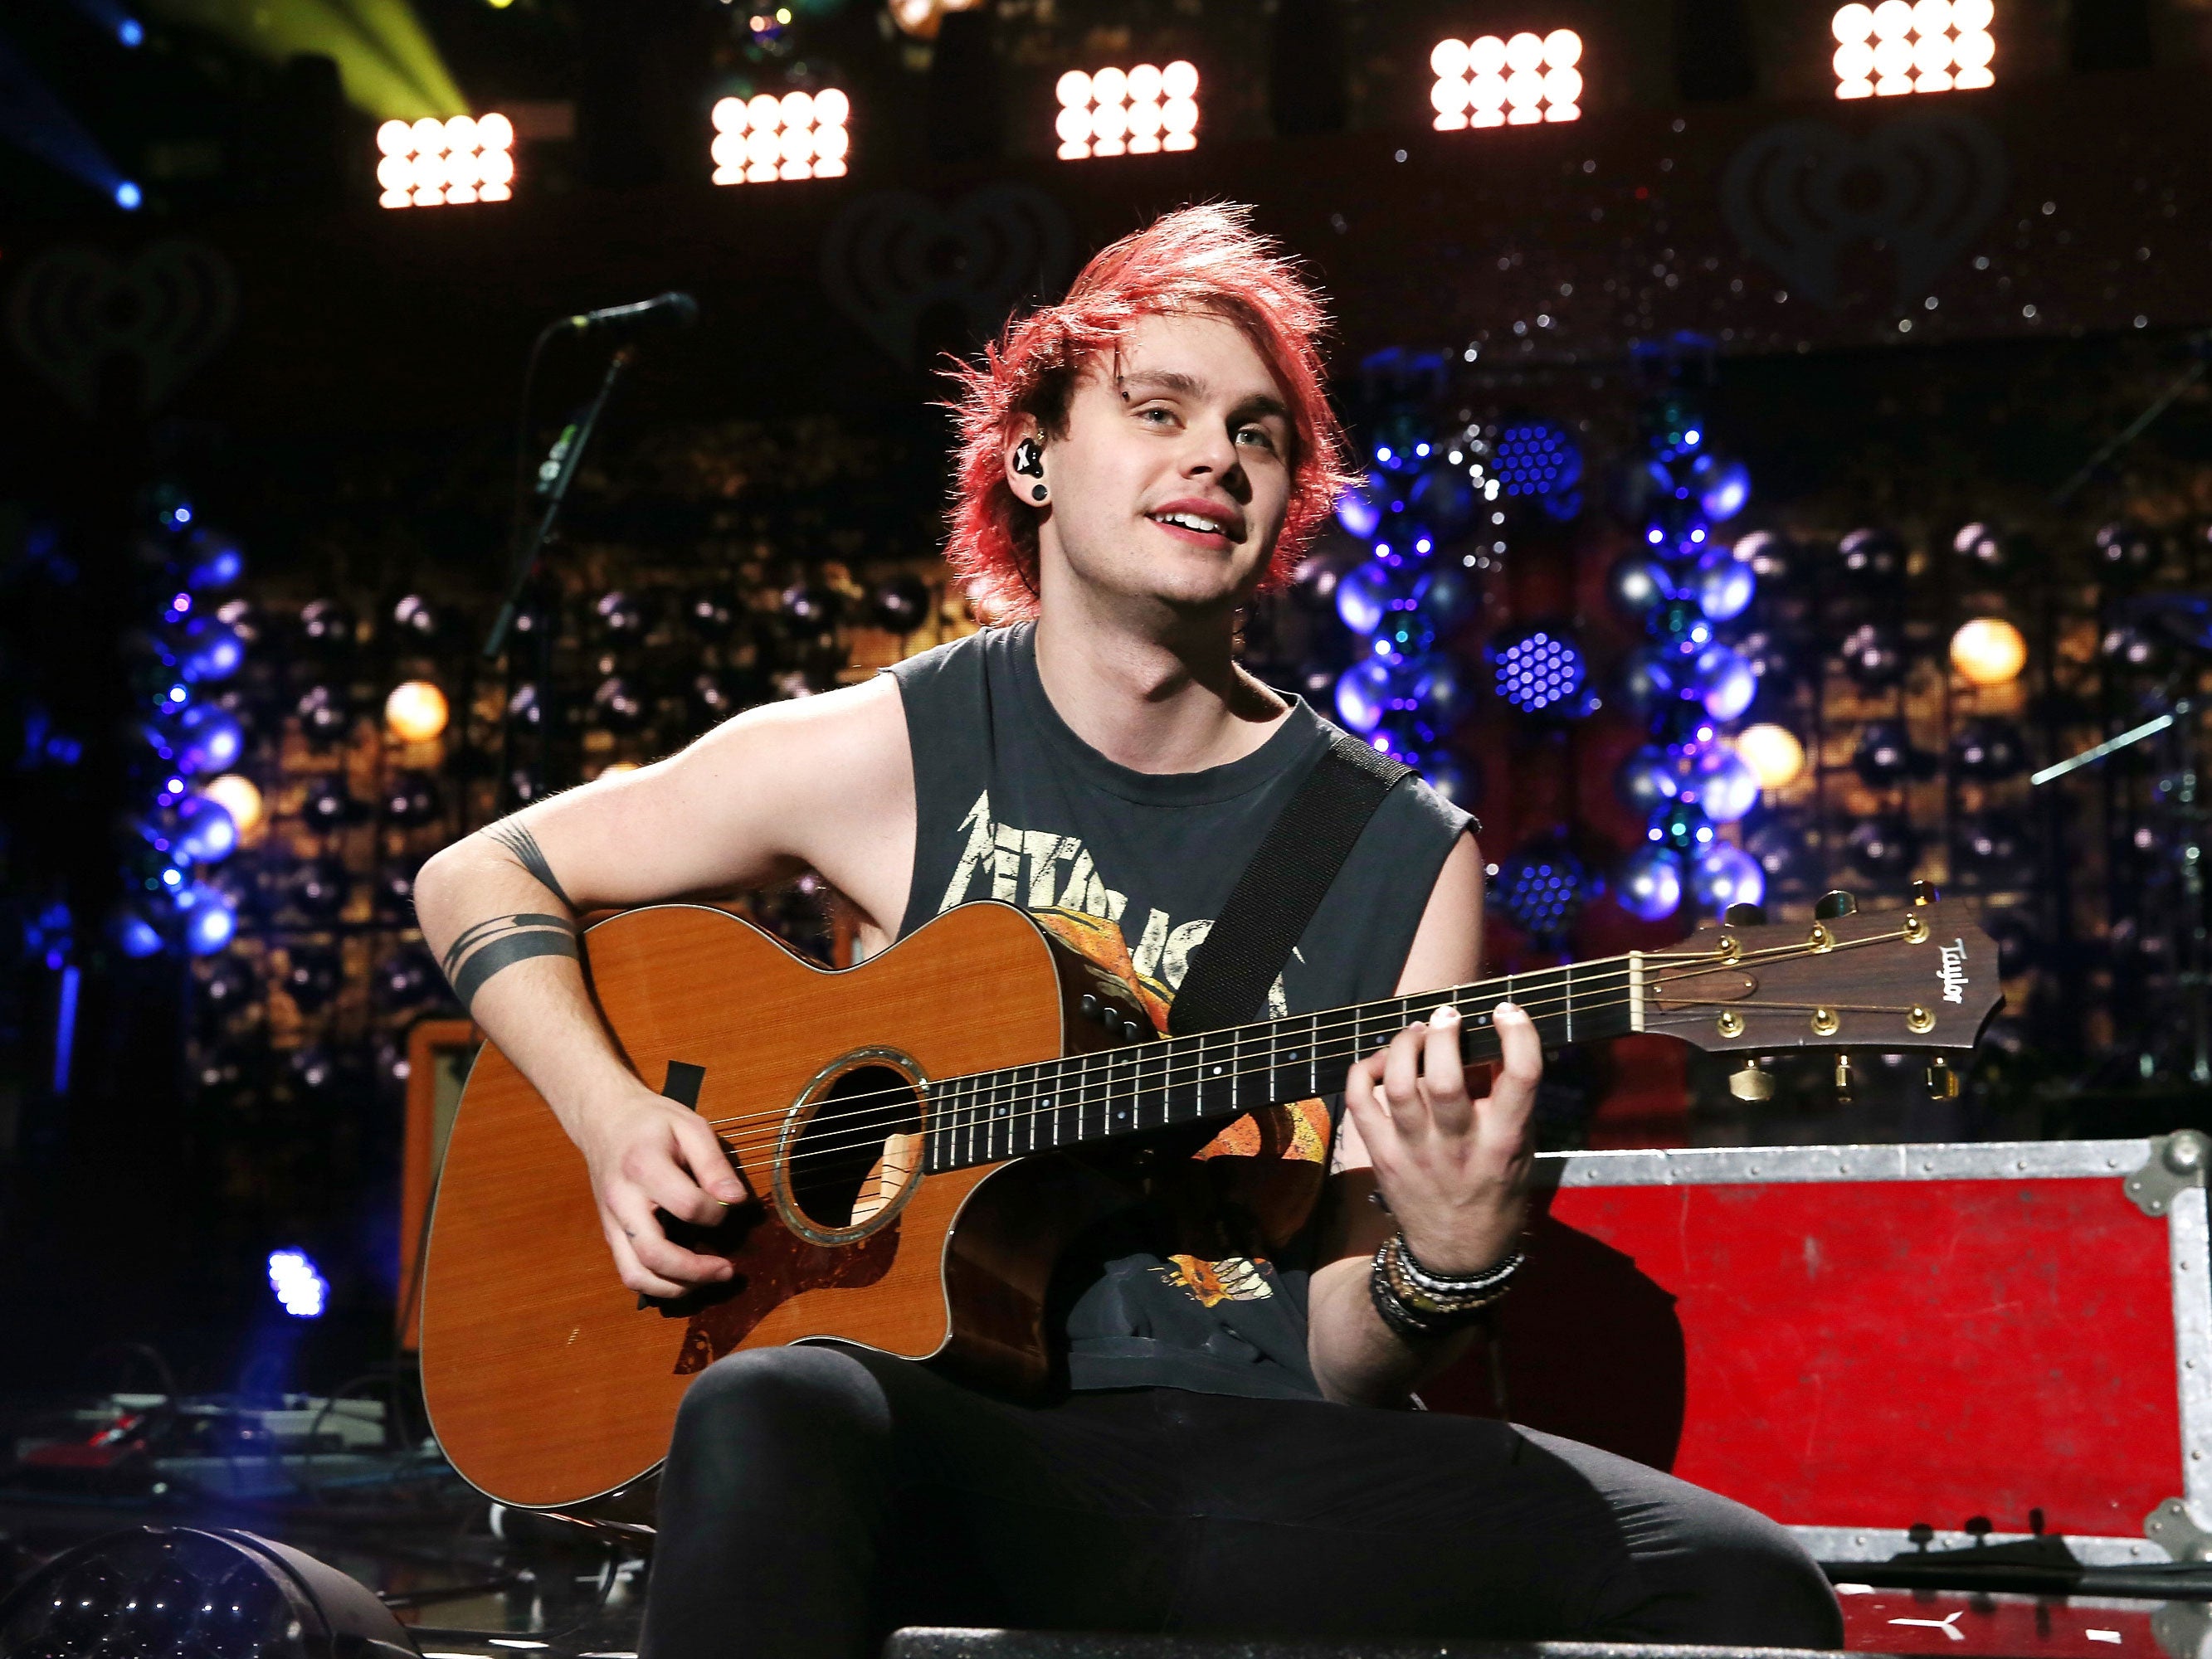 5SOS's Michael Clifford's Blue Hair: A Symbol of Self-Expression - wide 7